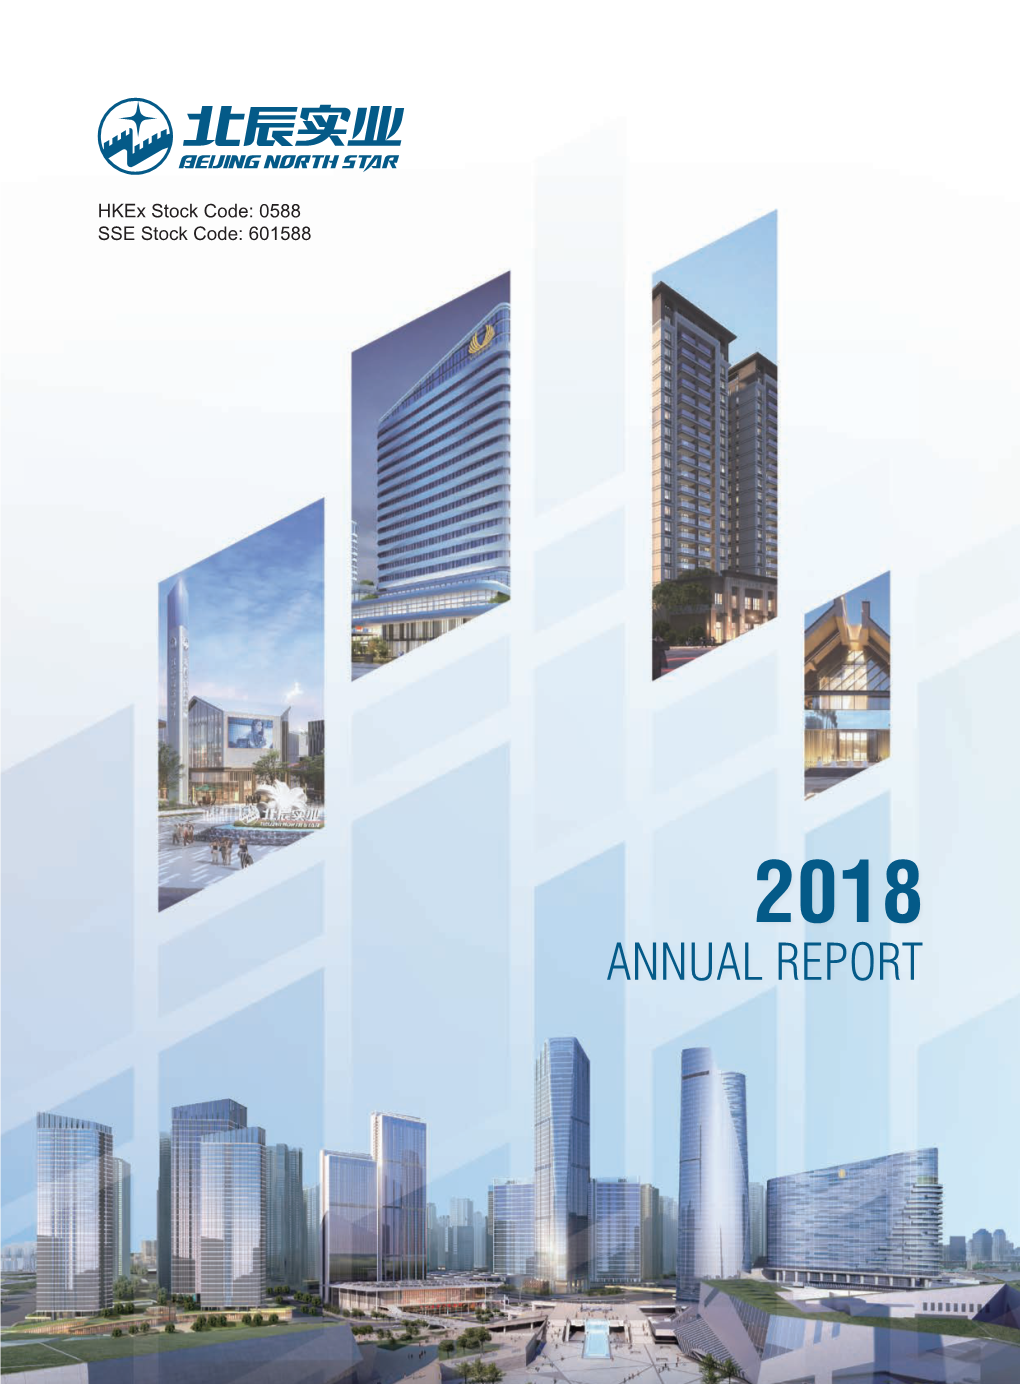 2018 ANNUAL REPORT Contents